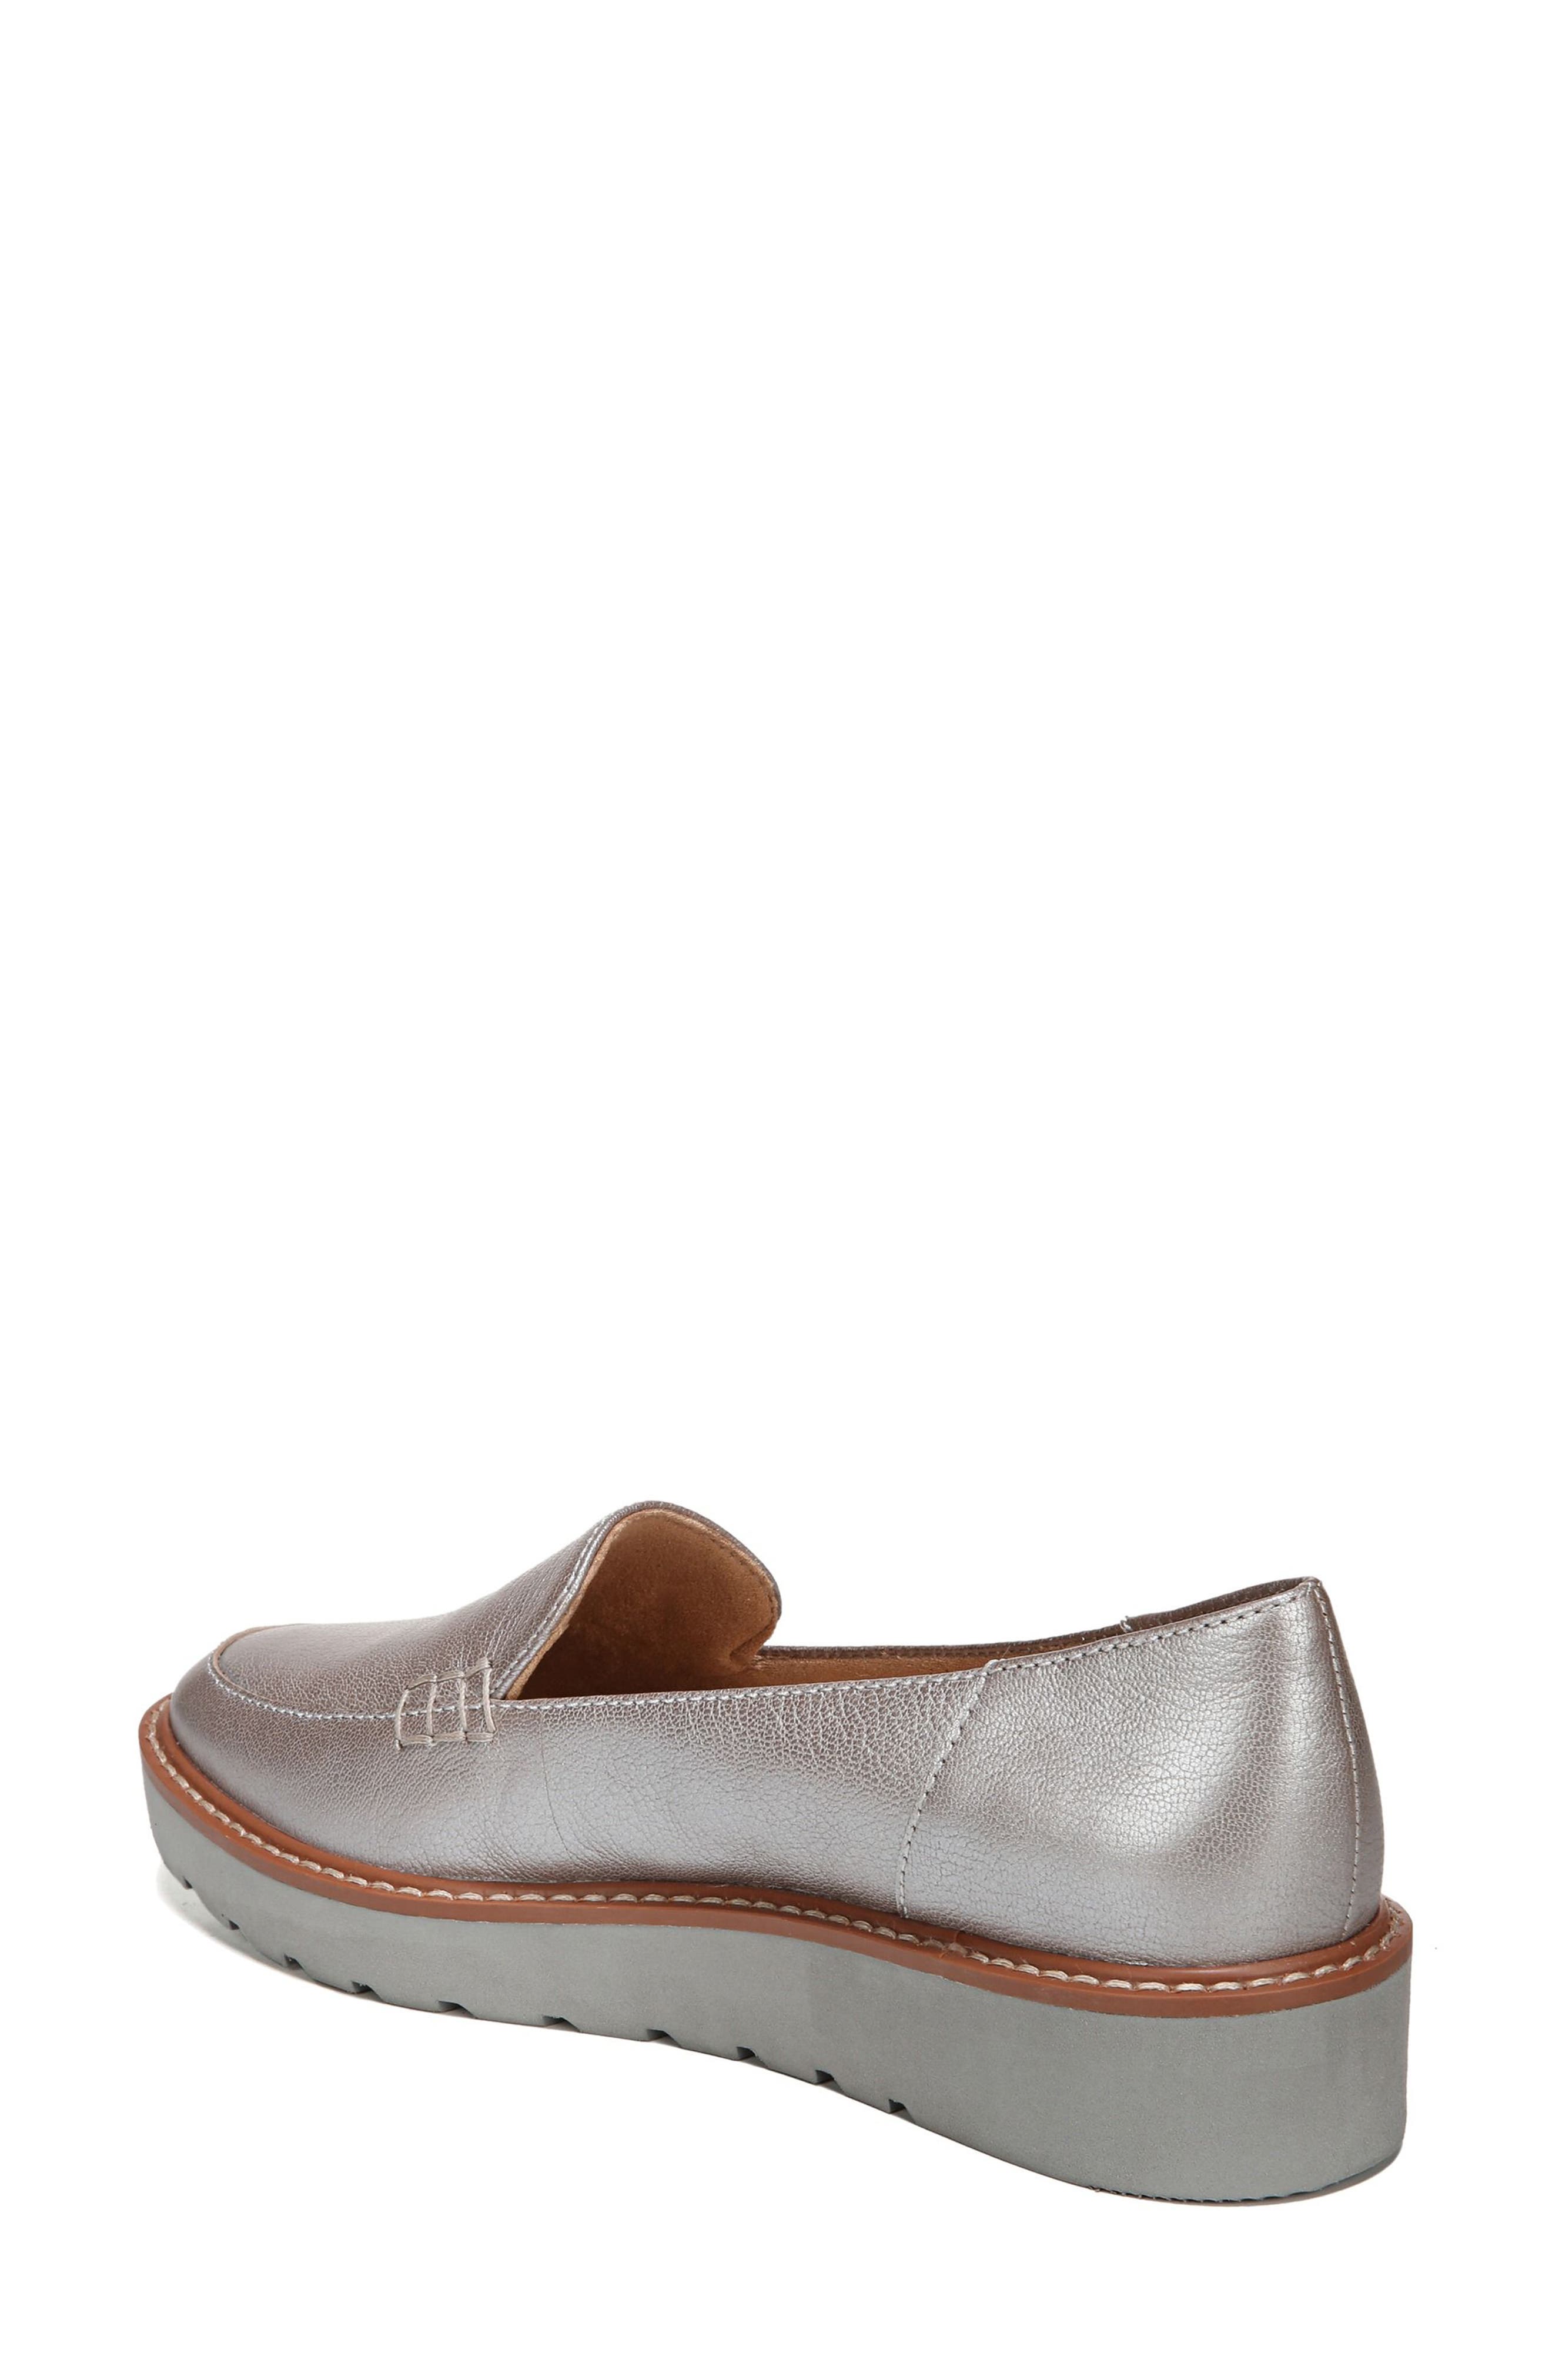 Where to Buy Naturalizer Andie Loafer 